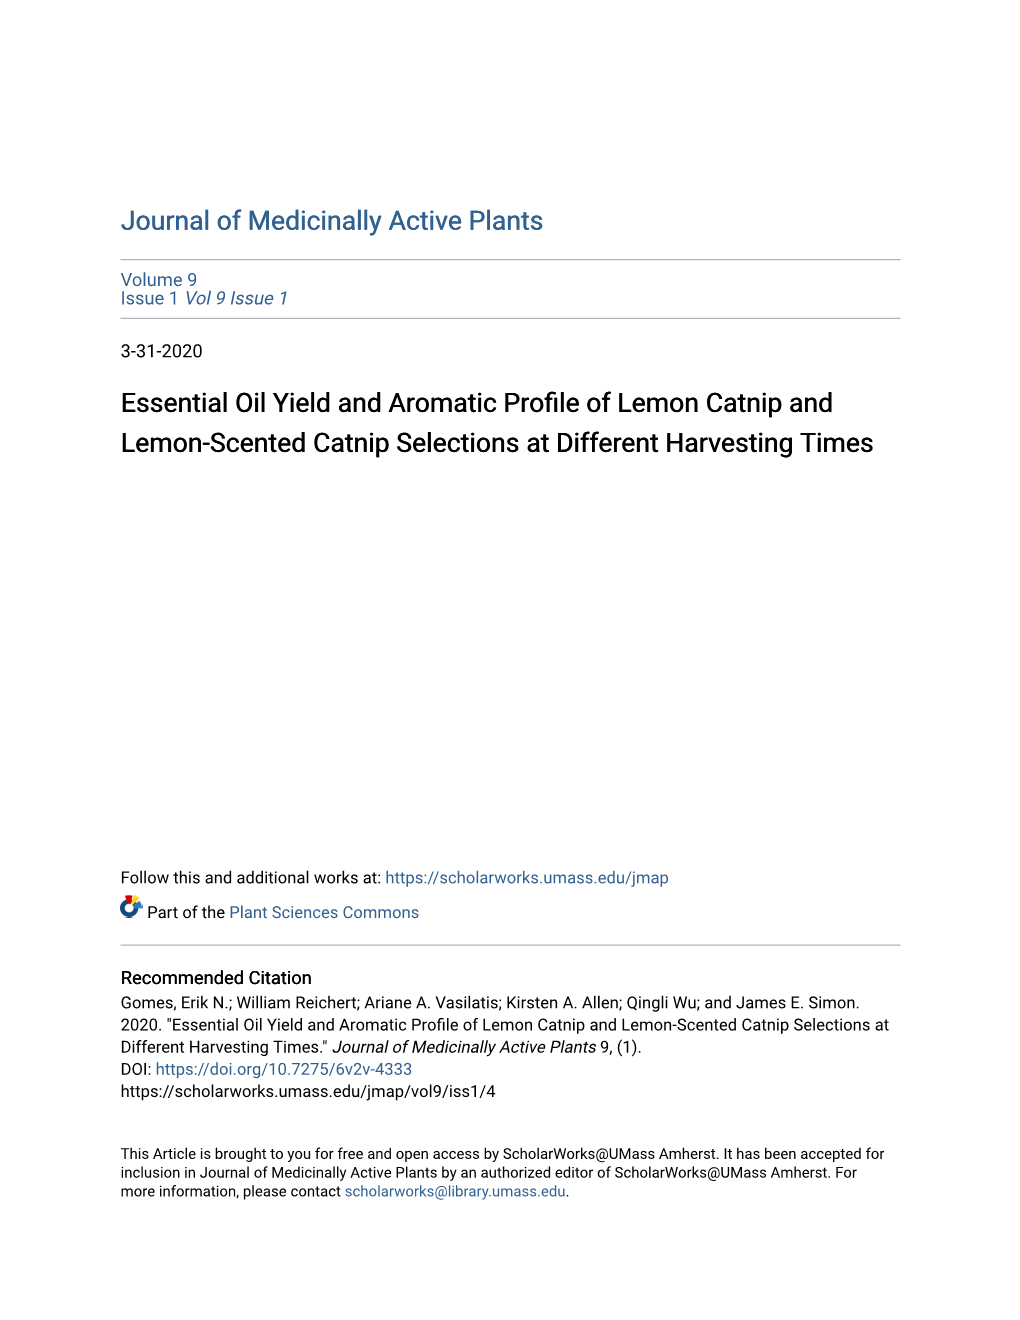 Essential Oil Yield and Aromatic Profile of Lemon Catnip and Lemon-Scented Catnip Selections at Different Harvesting Times